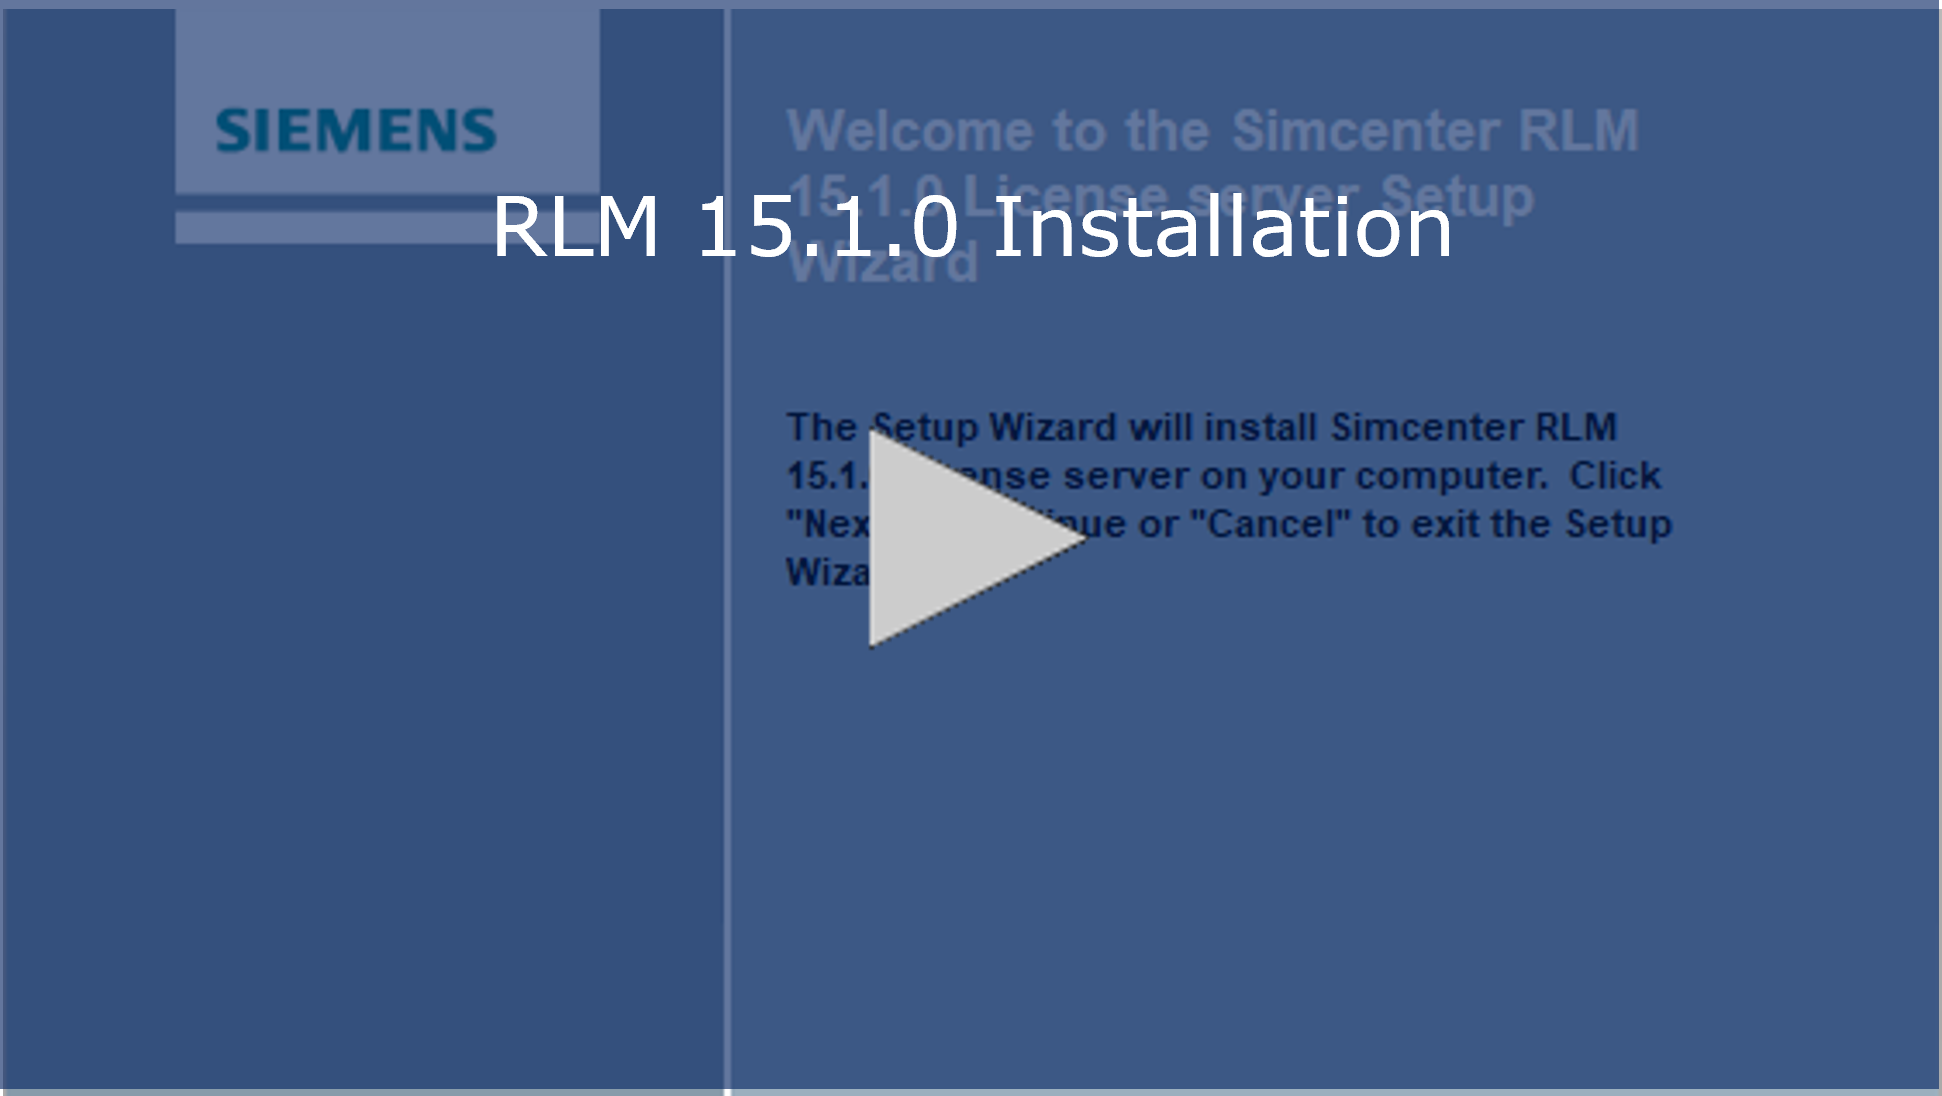 Image link to the video walkthrough of installing the RLM 15.1.0 License Server.